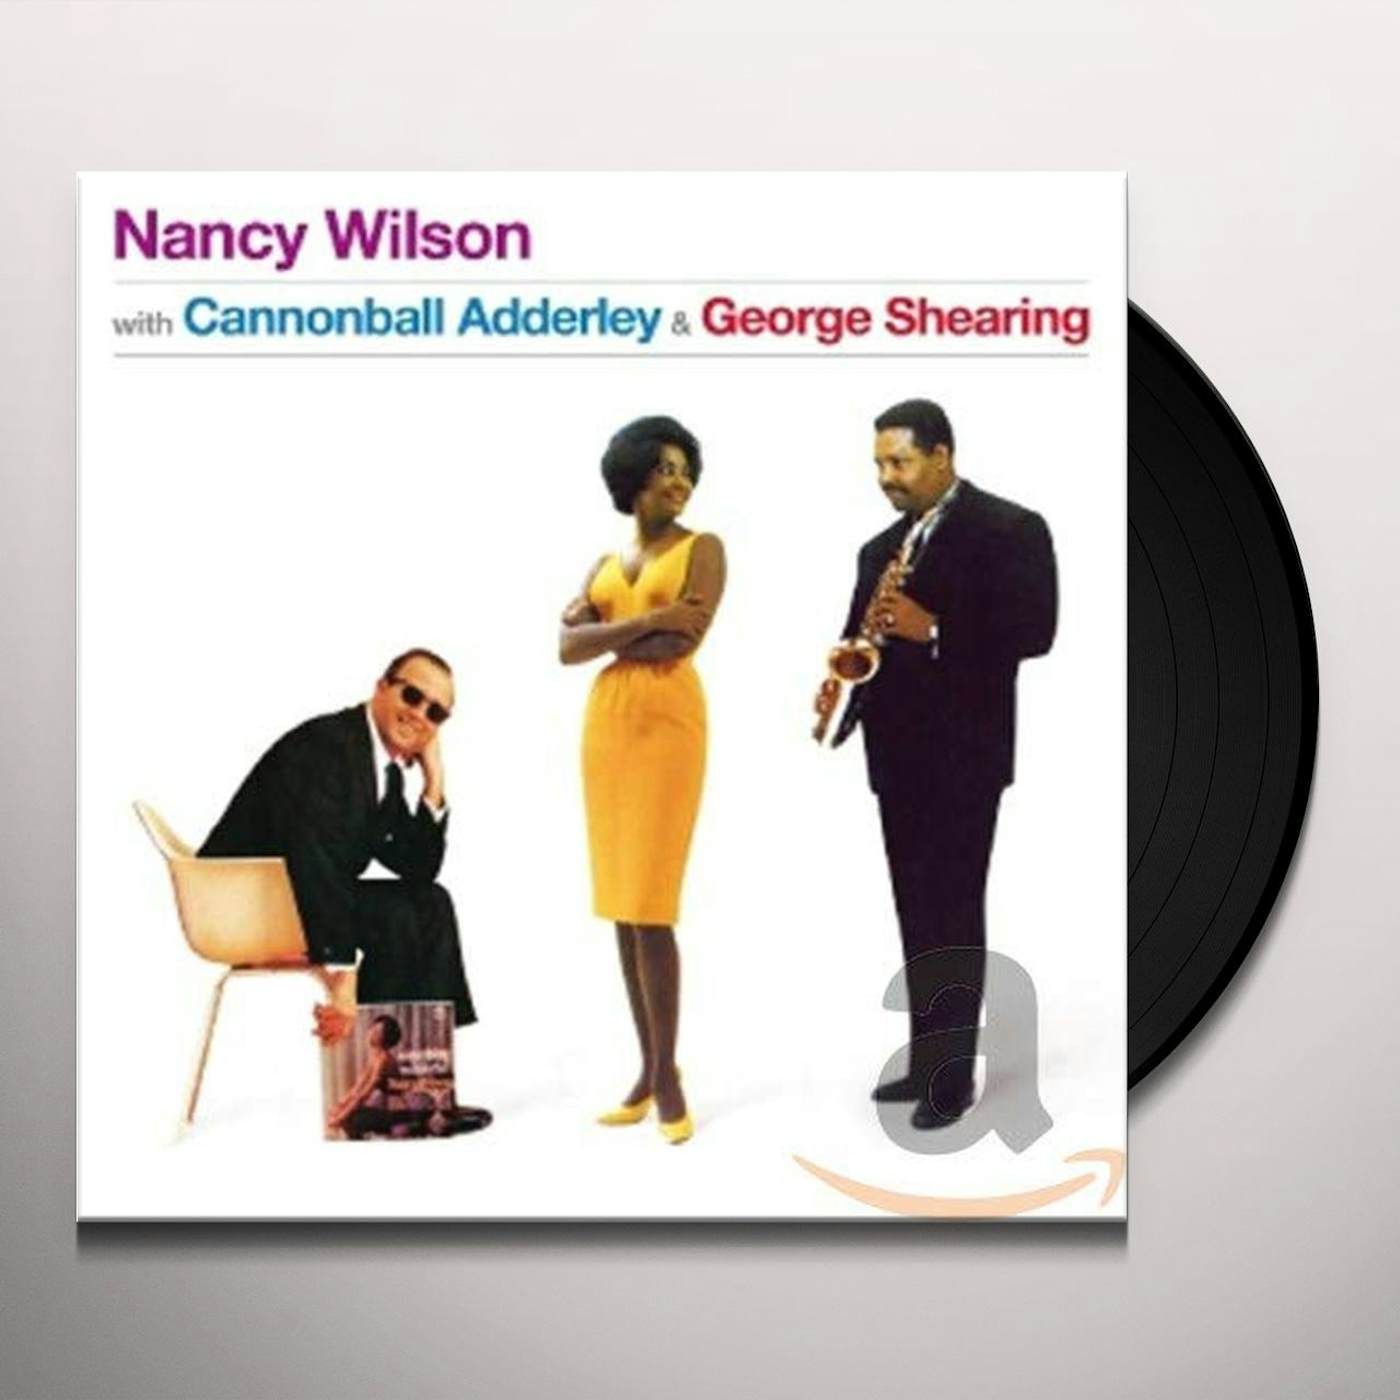 NANCY WILSON WITH CANNONBALL ADDERLEY & GEORGE SHEARING Vinyl Record